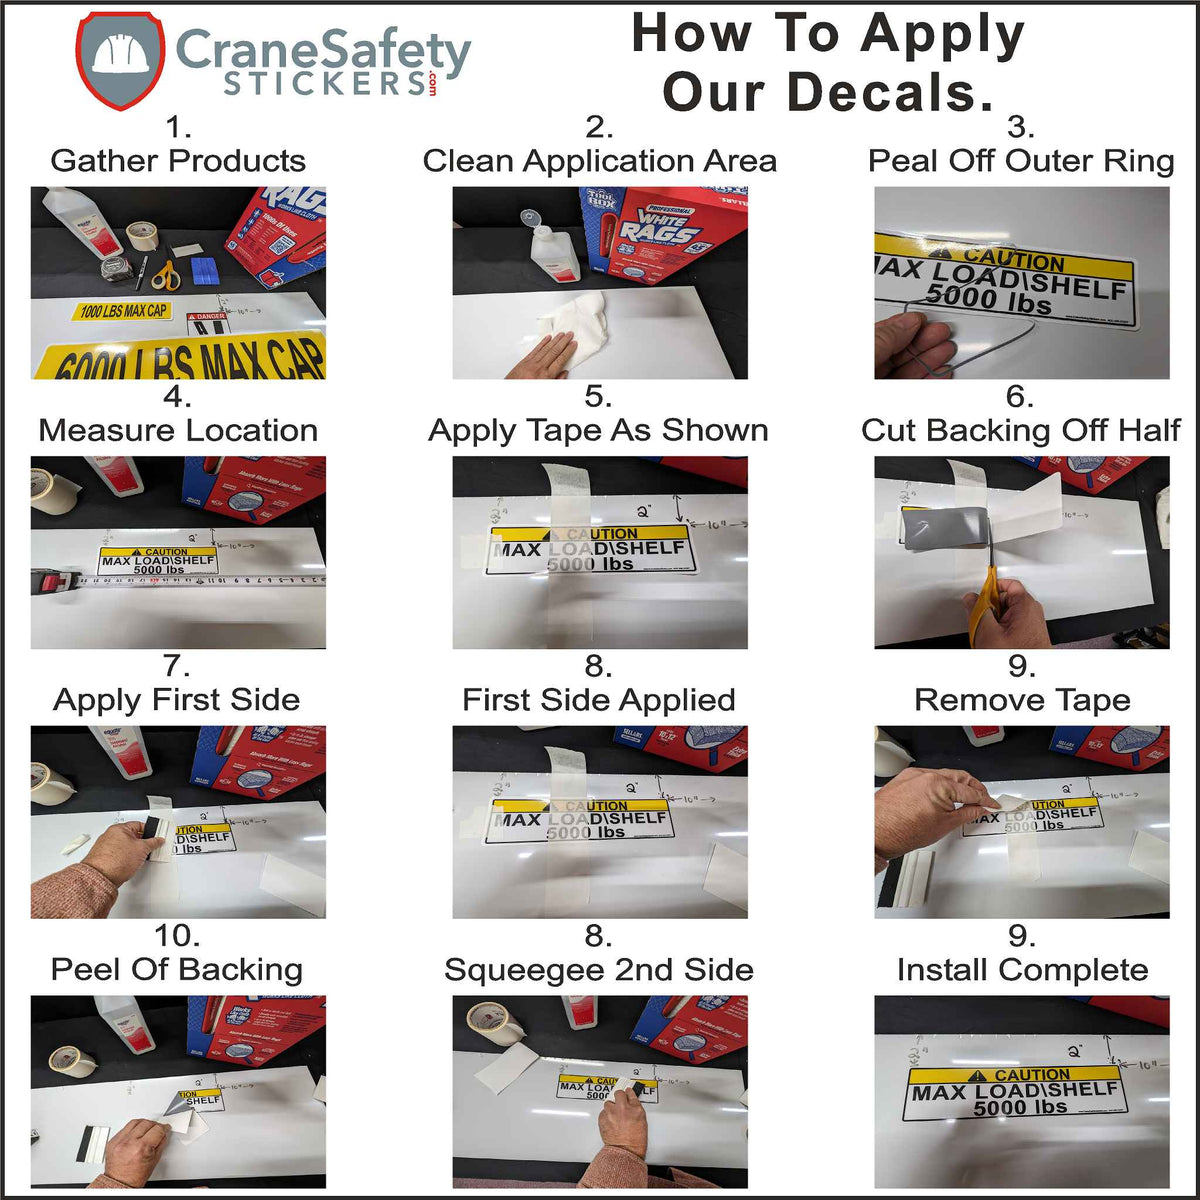 Directions on how to apply our danger look of for crane decal.